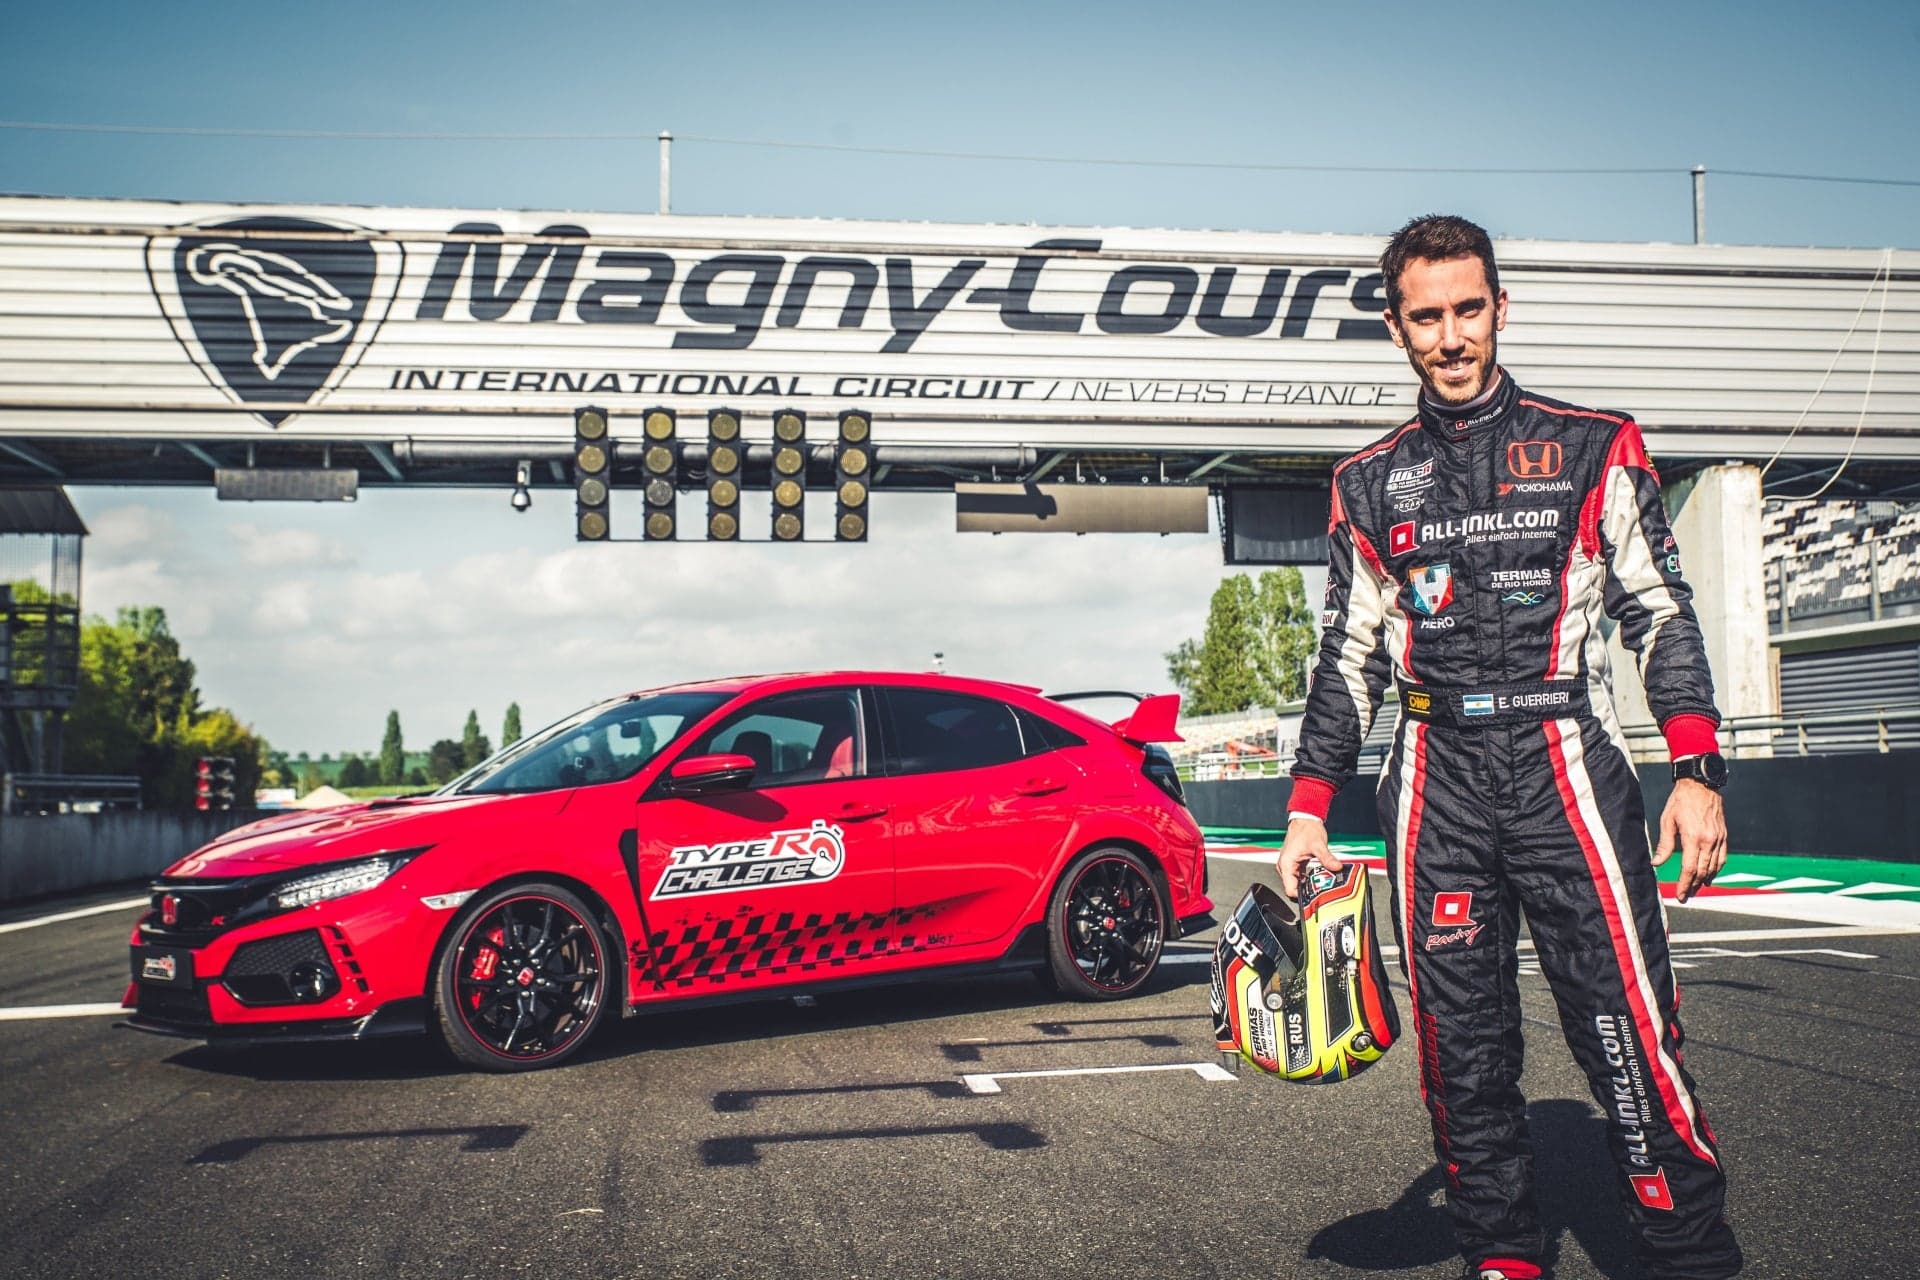 Honda Civic Type R Sets FWD Lap Record at Magny-Cours GP Circuit in France